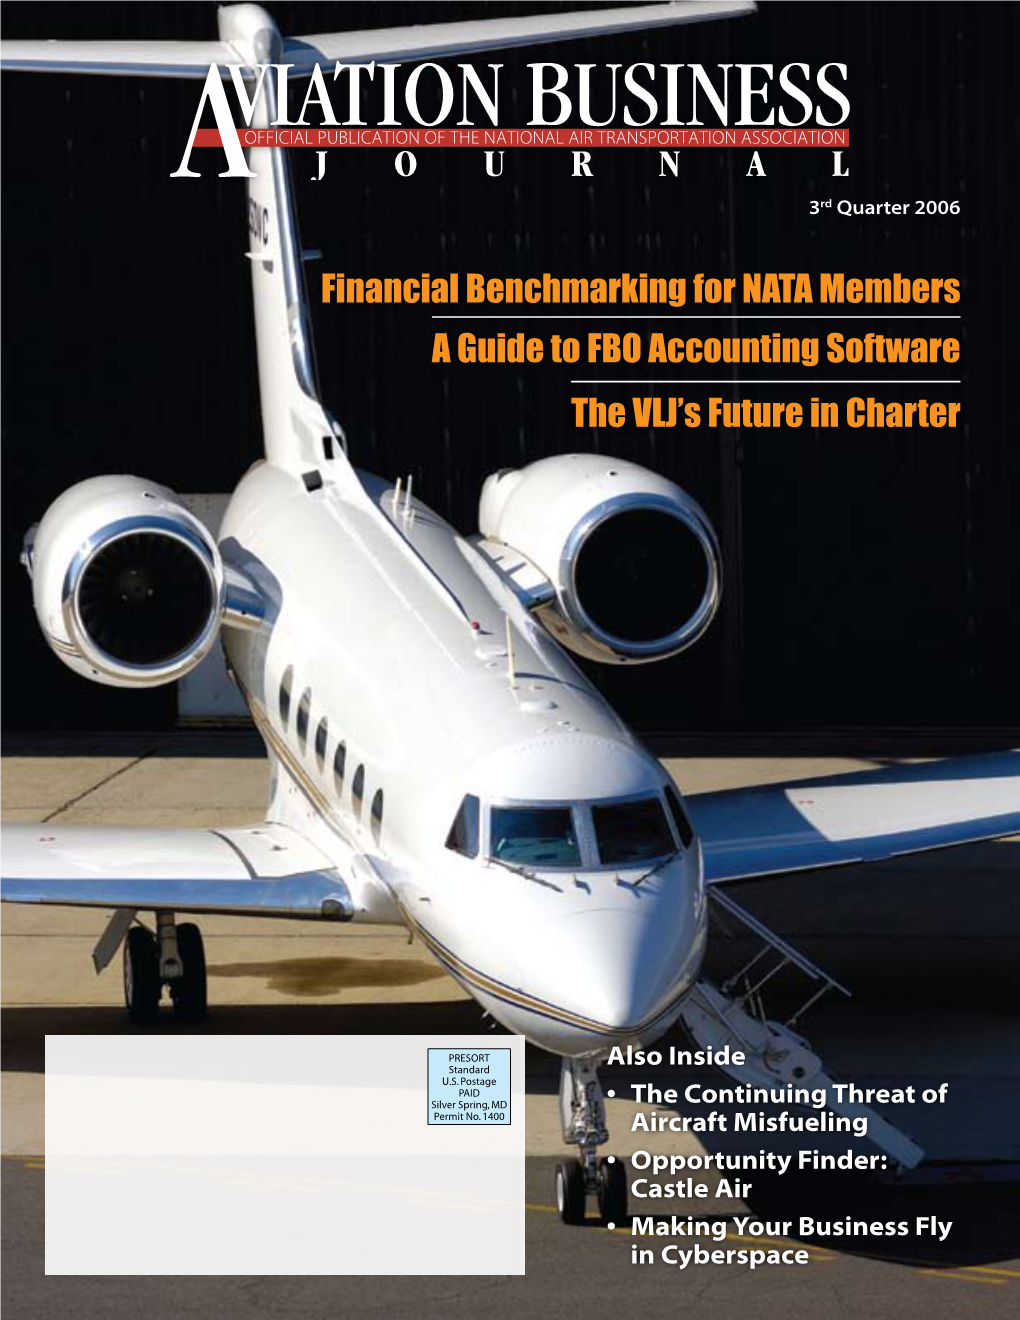 Financial Benchmarking for NATA Members a Guide to FBO Accounting Software the VLJ’S Future in Charter